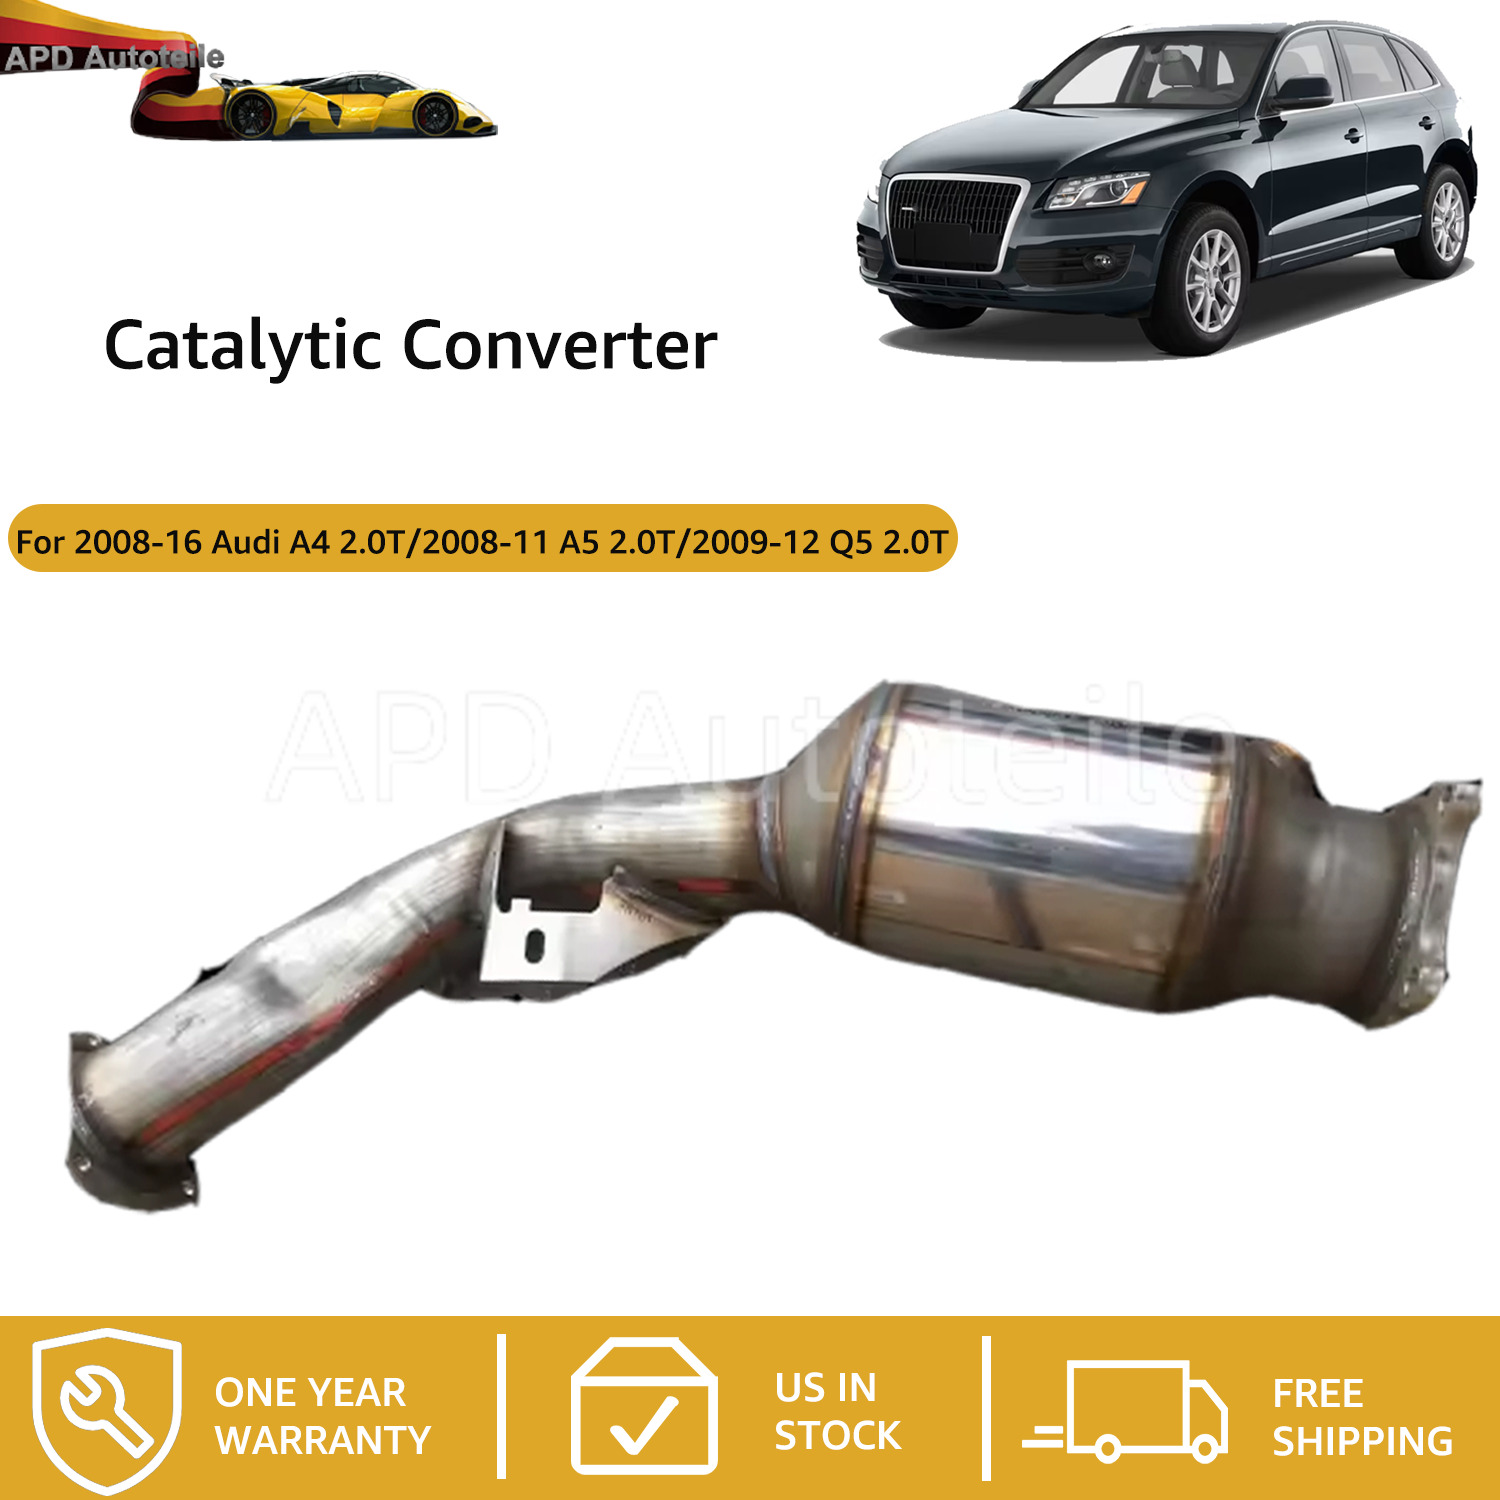 Catalytic Converter For 2008-2016 Audi A4 2.0T/ 2008-11 A5 2.0T/ 2009-12 Q5 2.0T